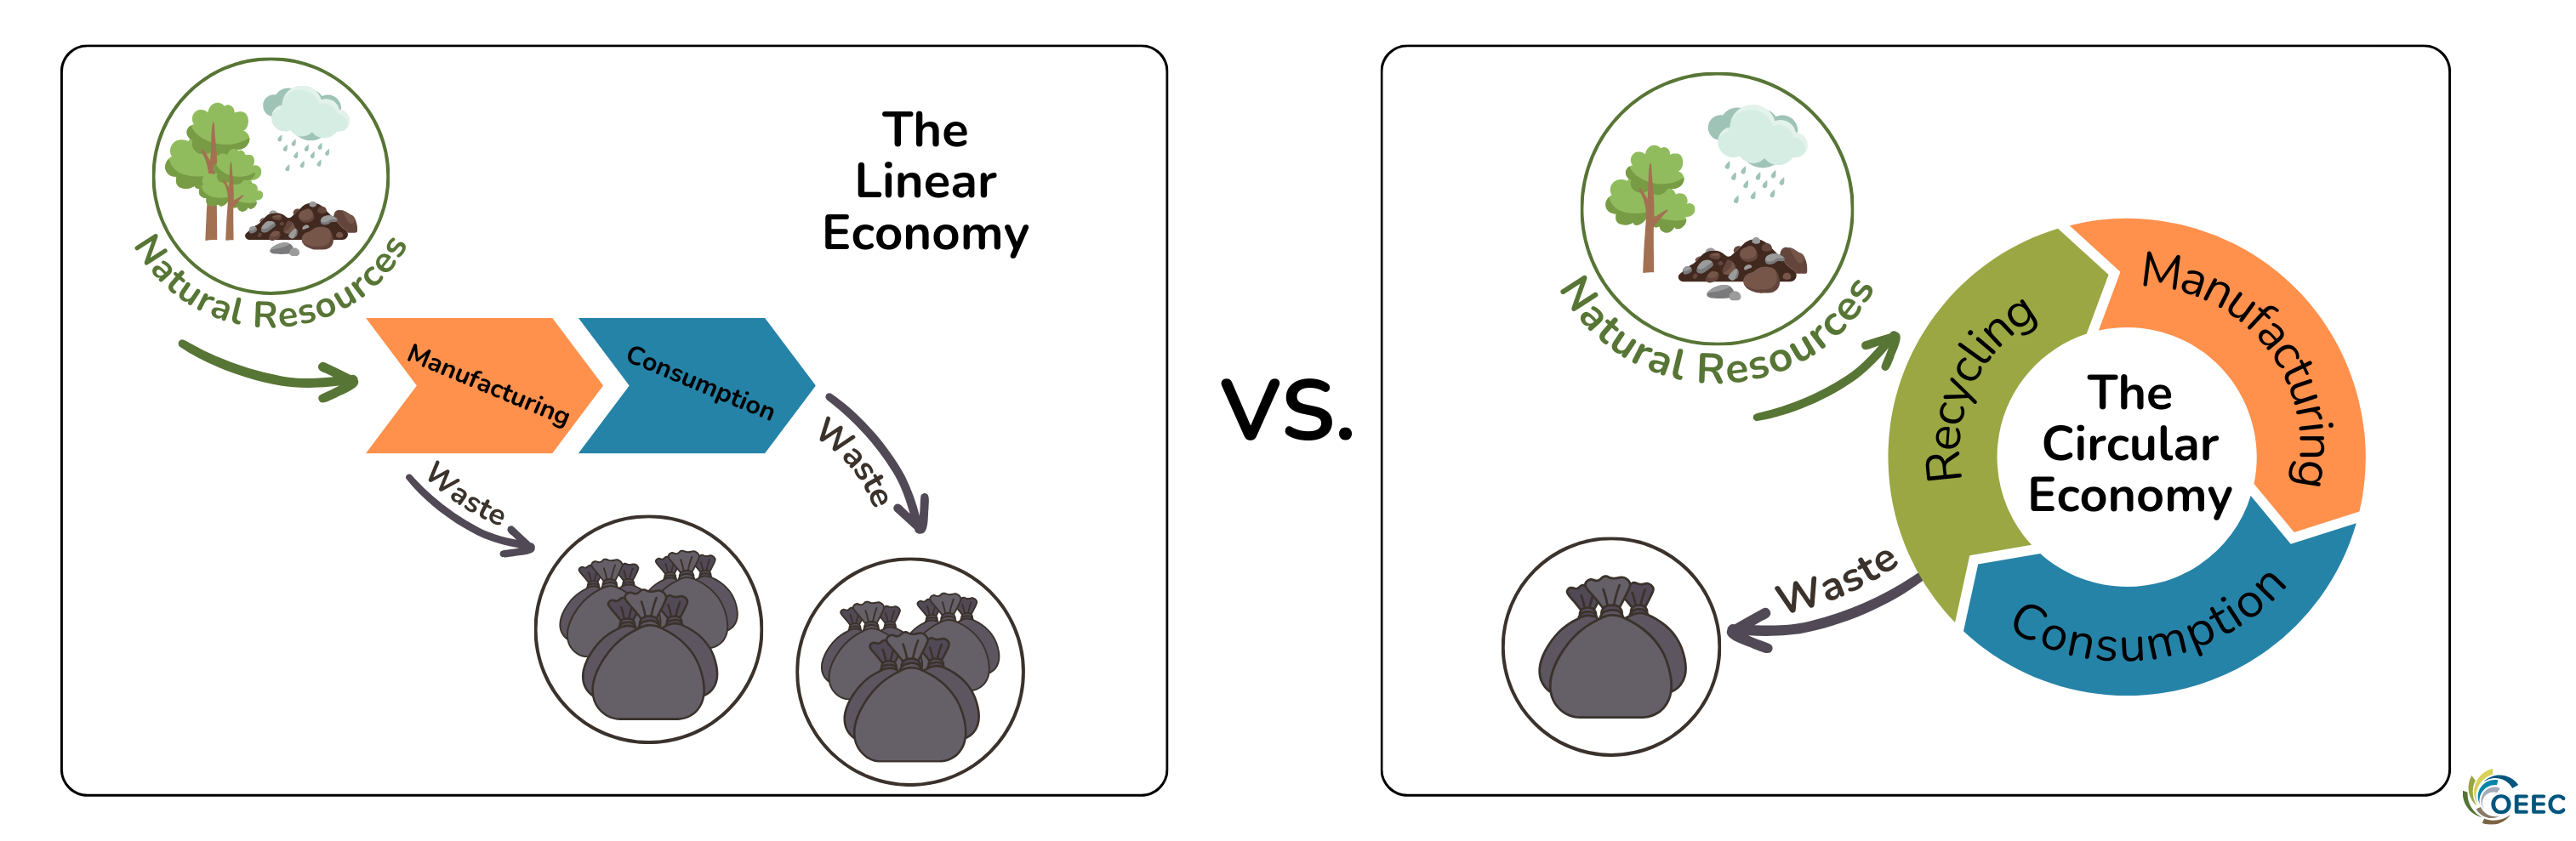 graphics of a linear economy and a circular economy compared